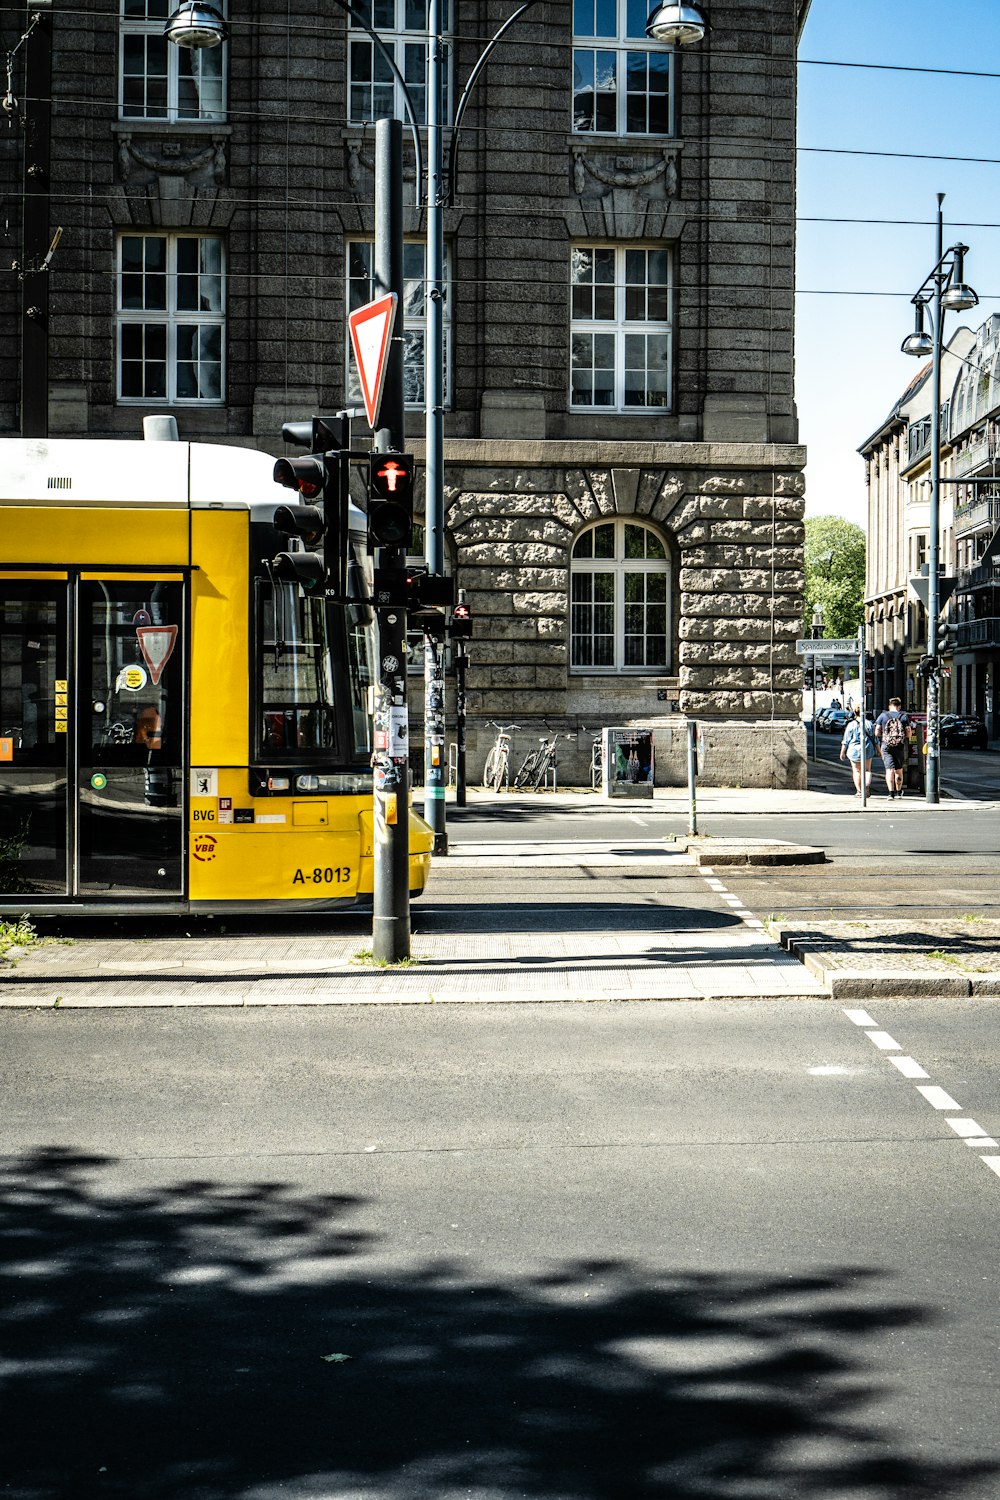 a yellow bus stopped at a traffic light